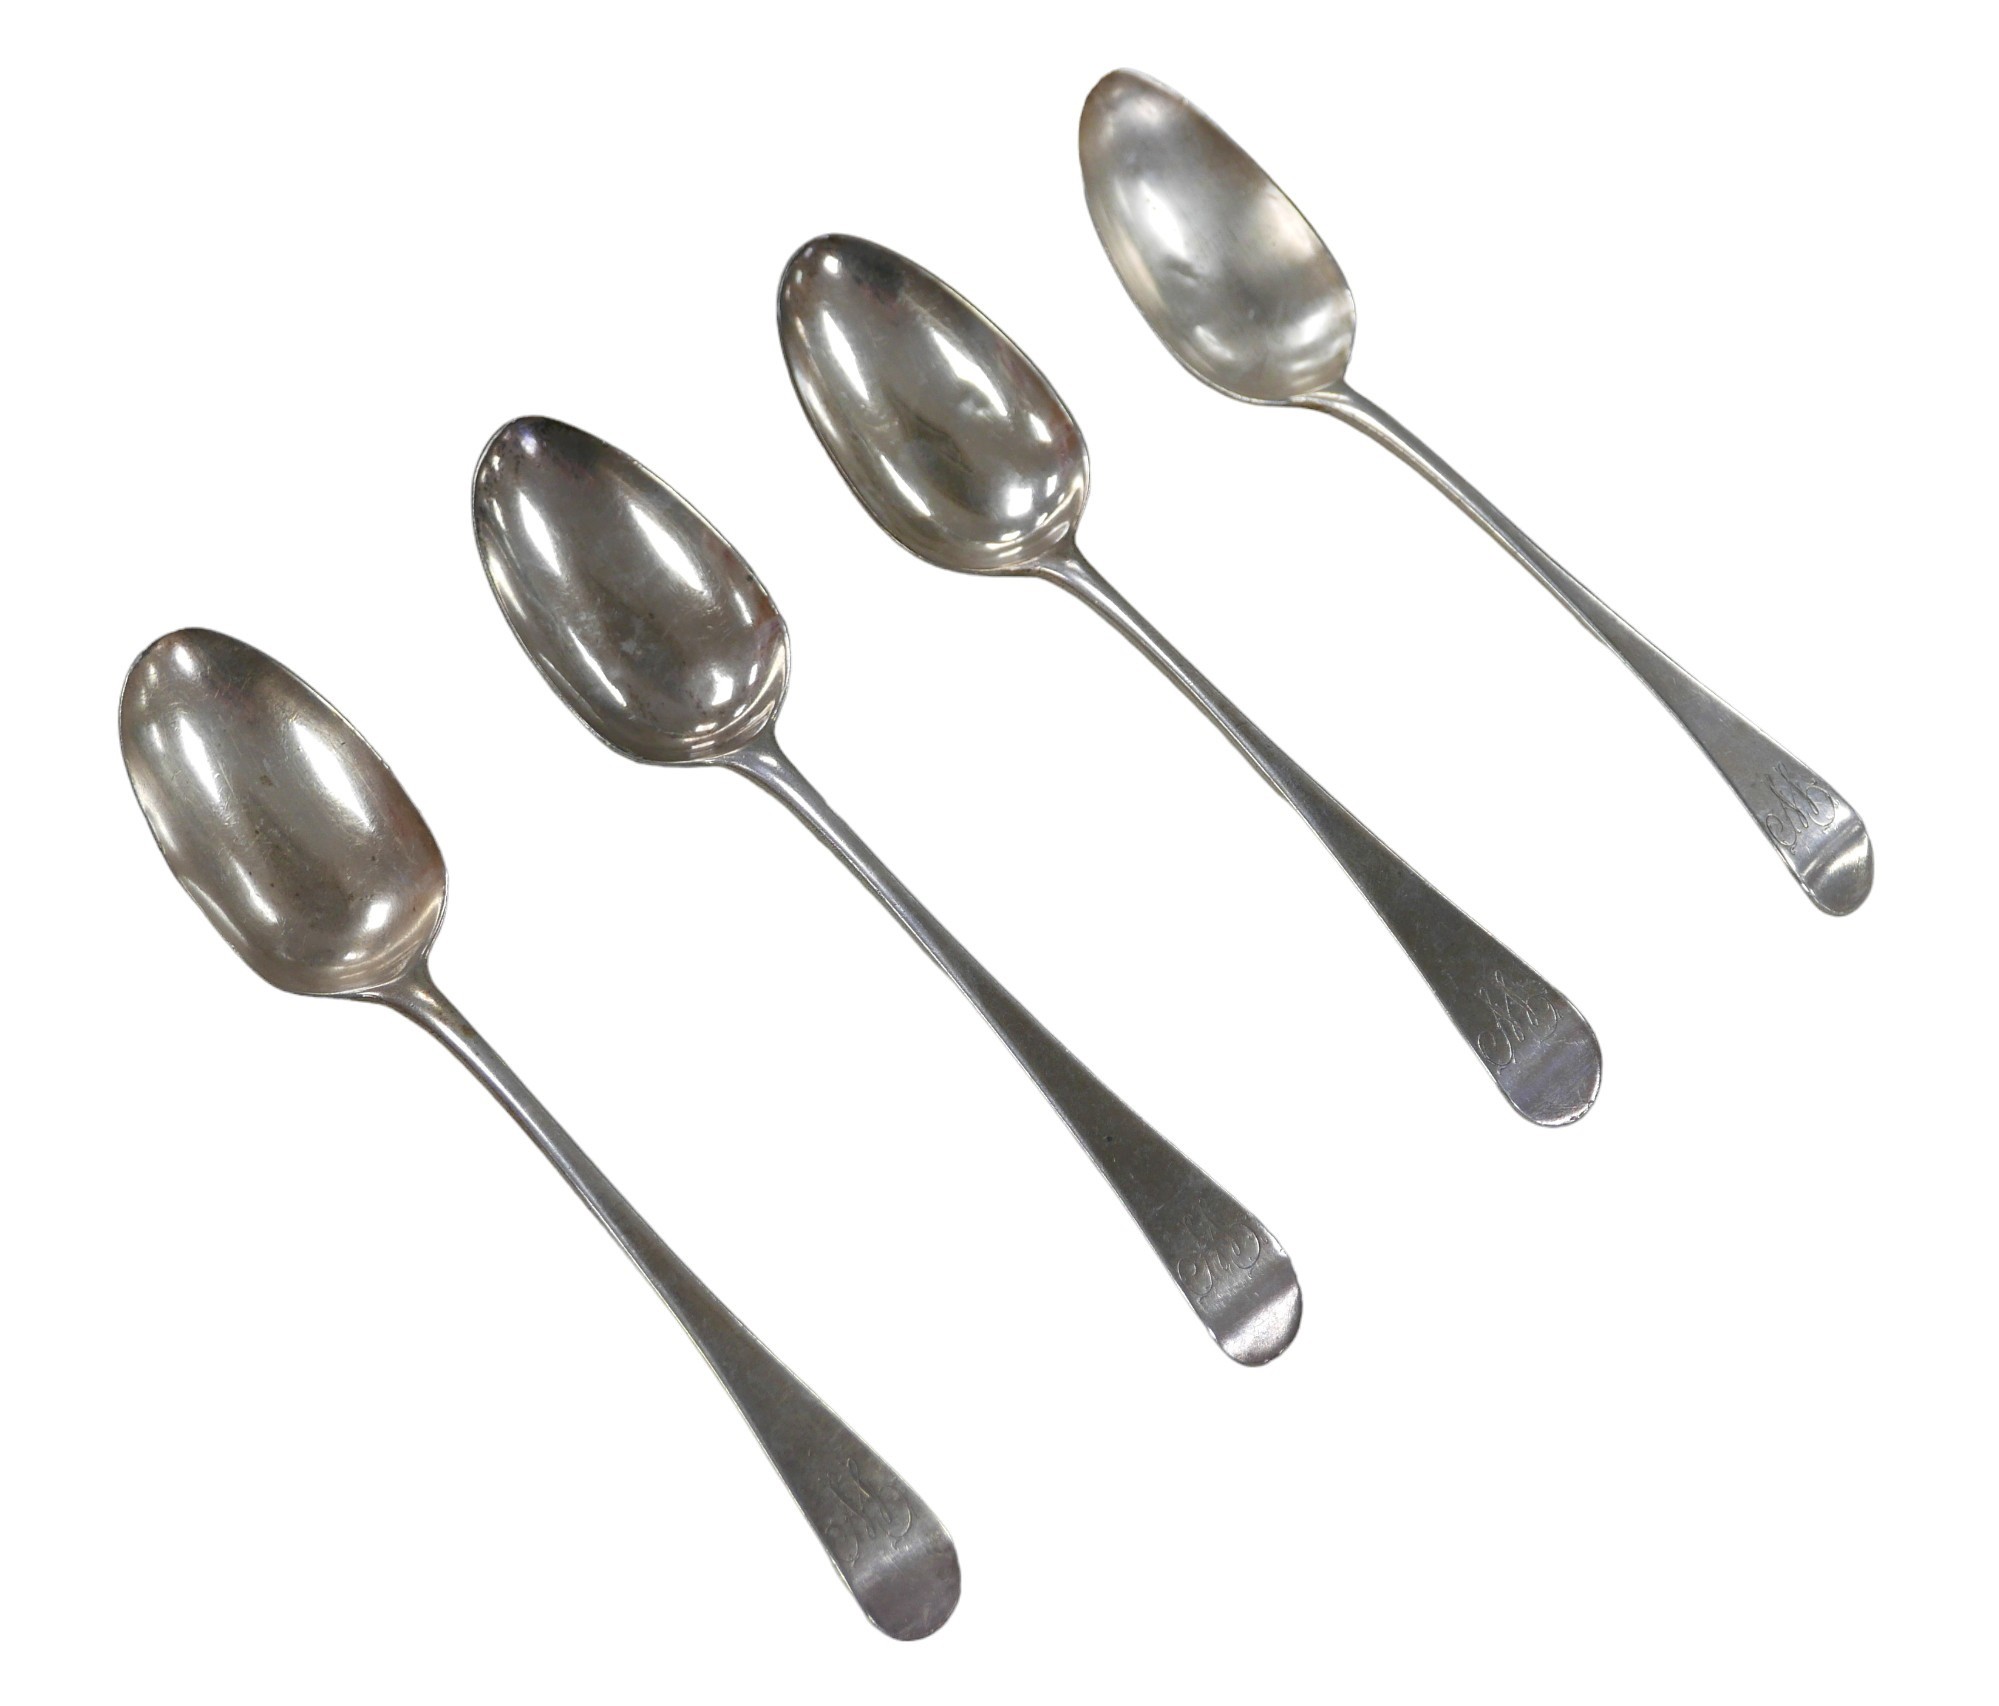 Four George III silver old English pattern table spoons, each engraved with the initial 'M' to